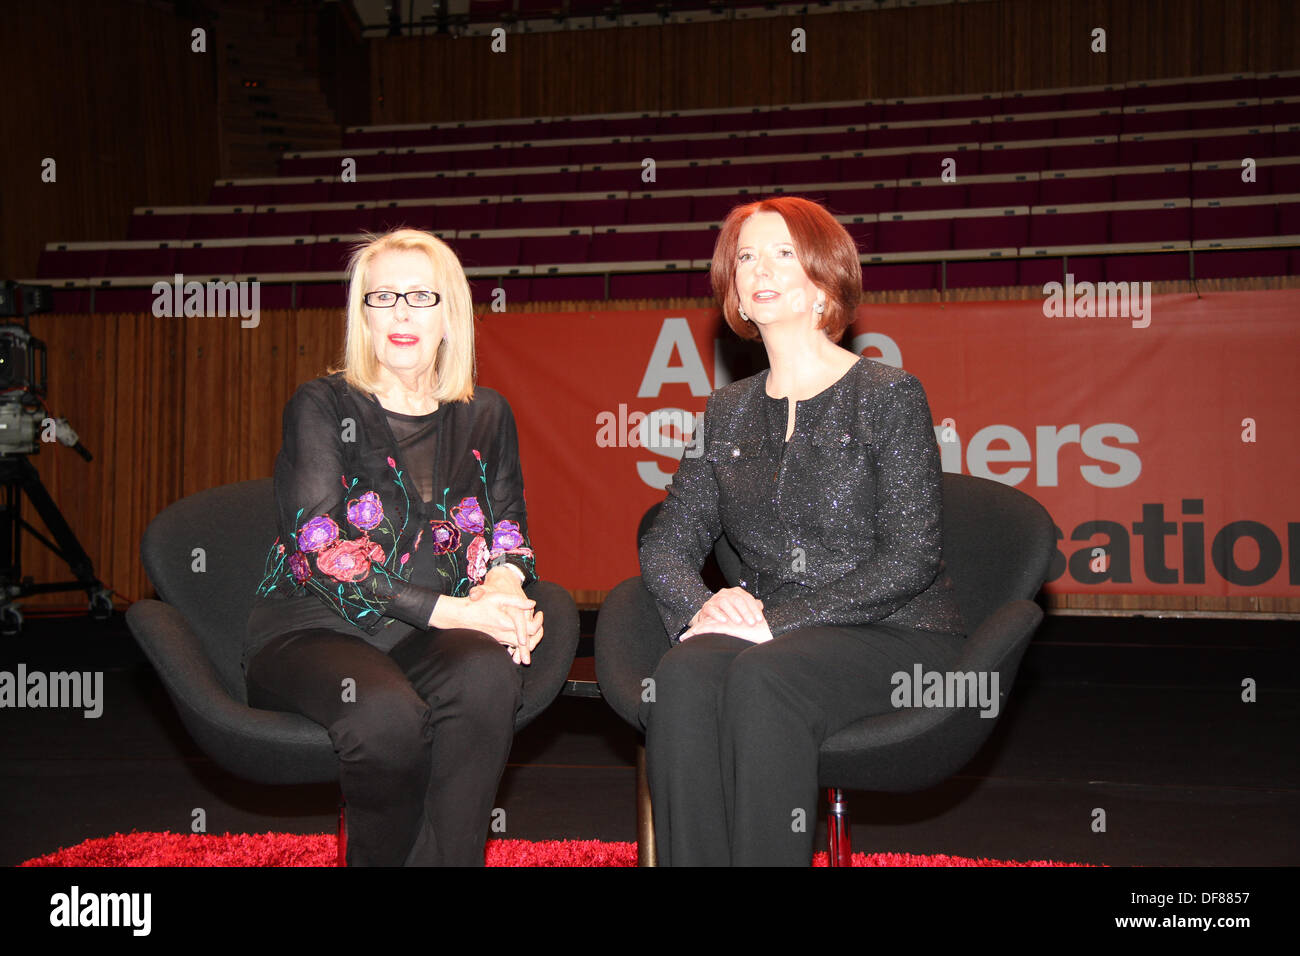 Sydney, Australia. 30th Sep, 2013. Julia Gillard makes her first public appearance since leaving the Prime Ministership in an interview with Anne Summers at the Sydney Opera House. Photos taken at photo-call before the event. Pictured are Anne Summers (L) and former Australian Prime Minister Julia Gillard (R). Credit:  Richard Milnes/Alamy Live News Stock Photo